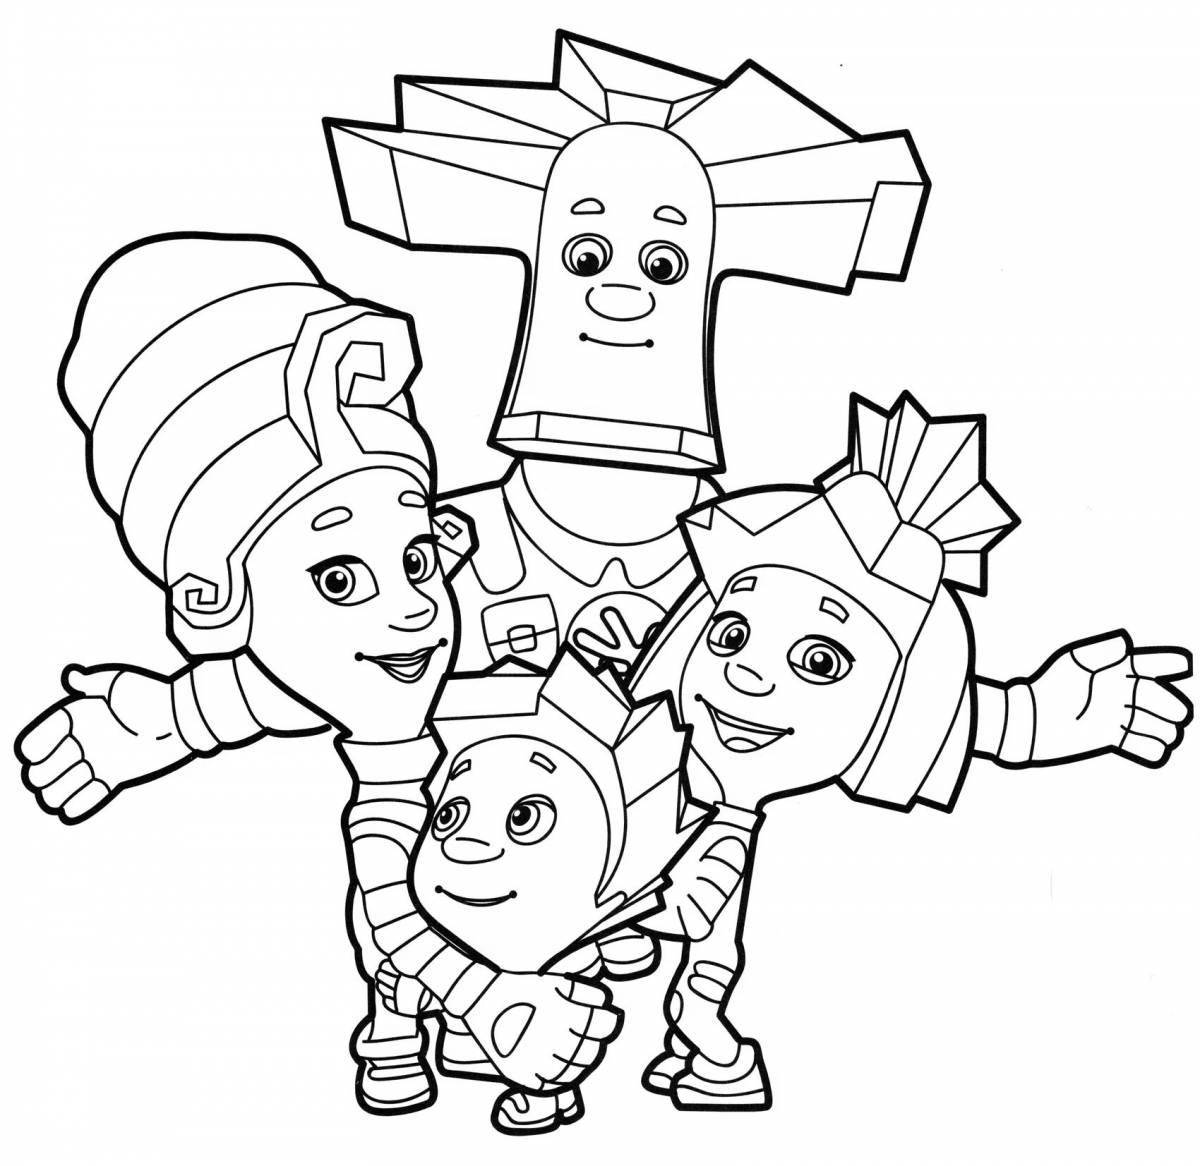 Coloring page amazing papus